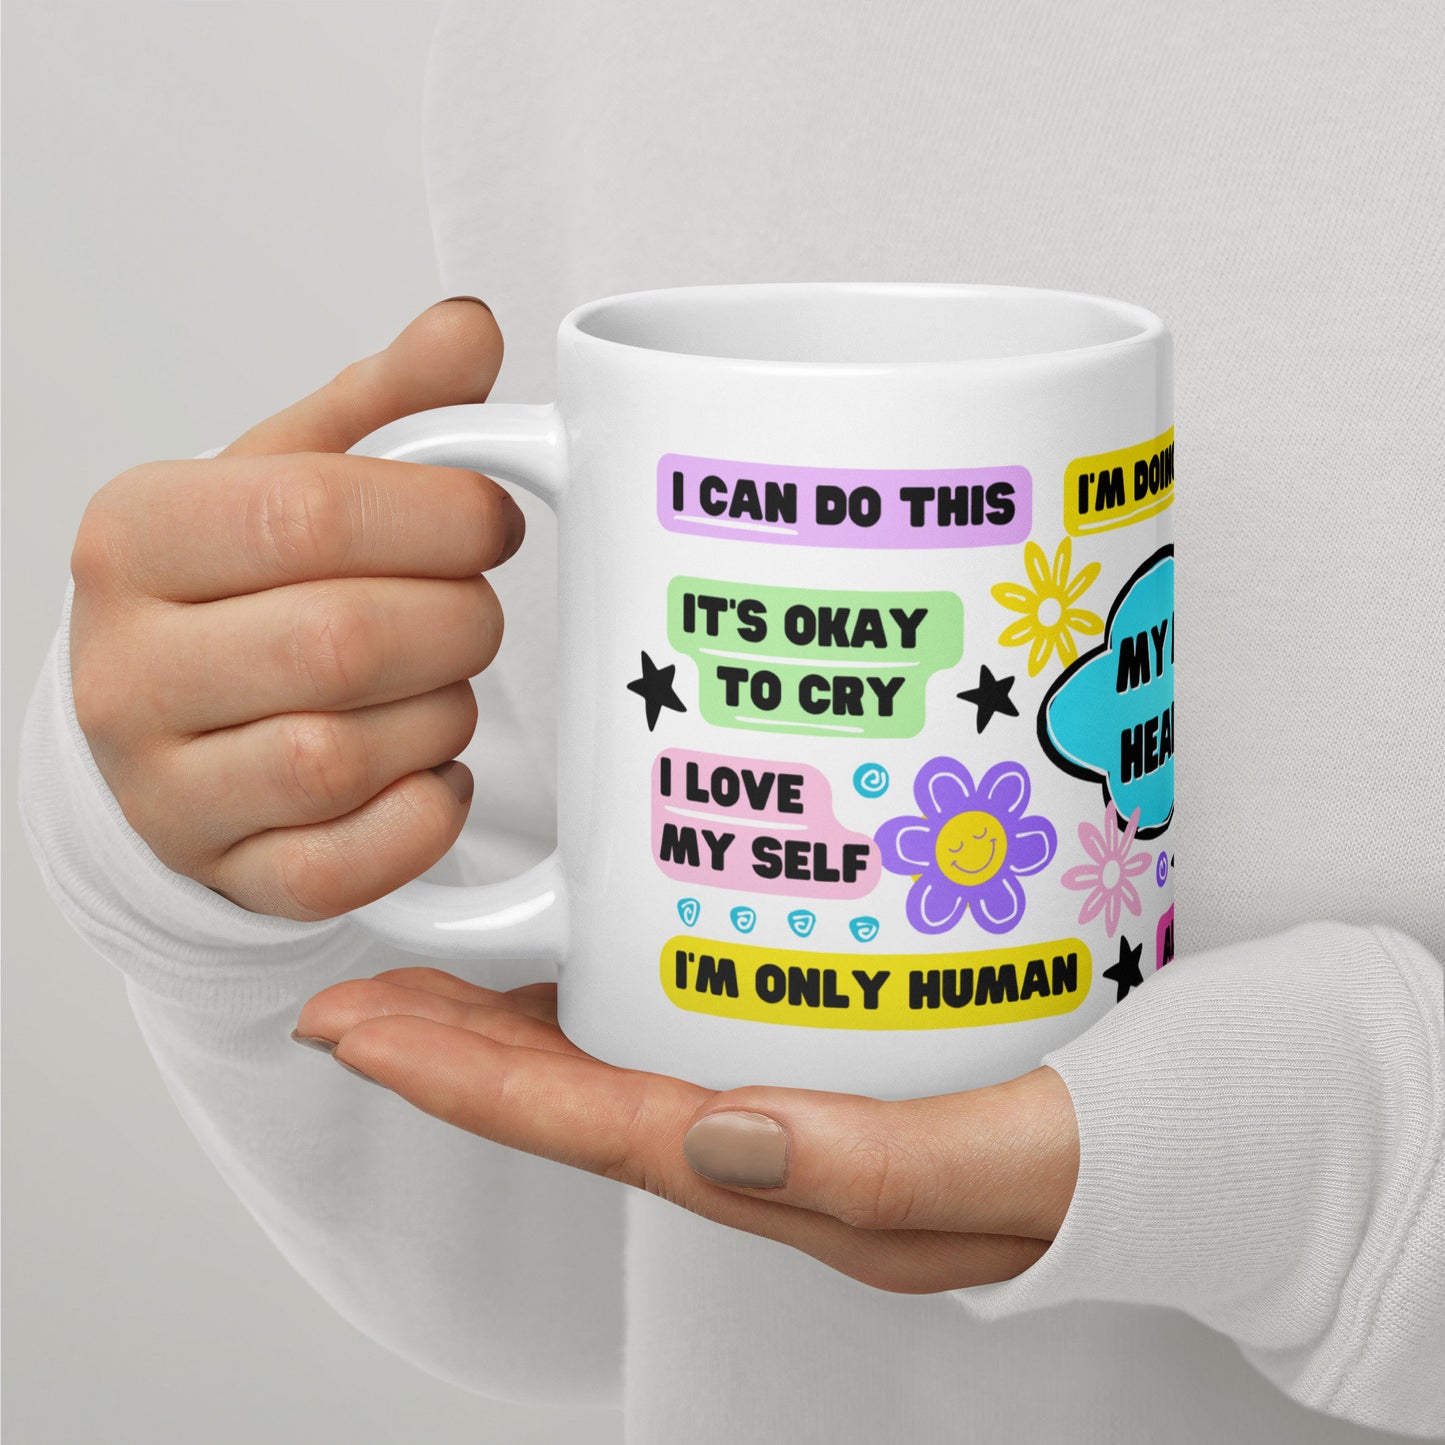 My Mental Health Cup White glossy mug | Affirmations, Mental Breakdown, Coffee Cup, Encouraging Quotes, Self Care, Anxiety, Self Love Art